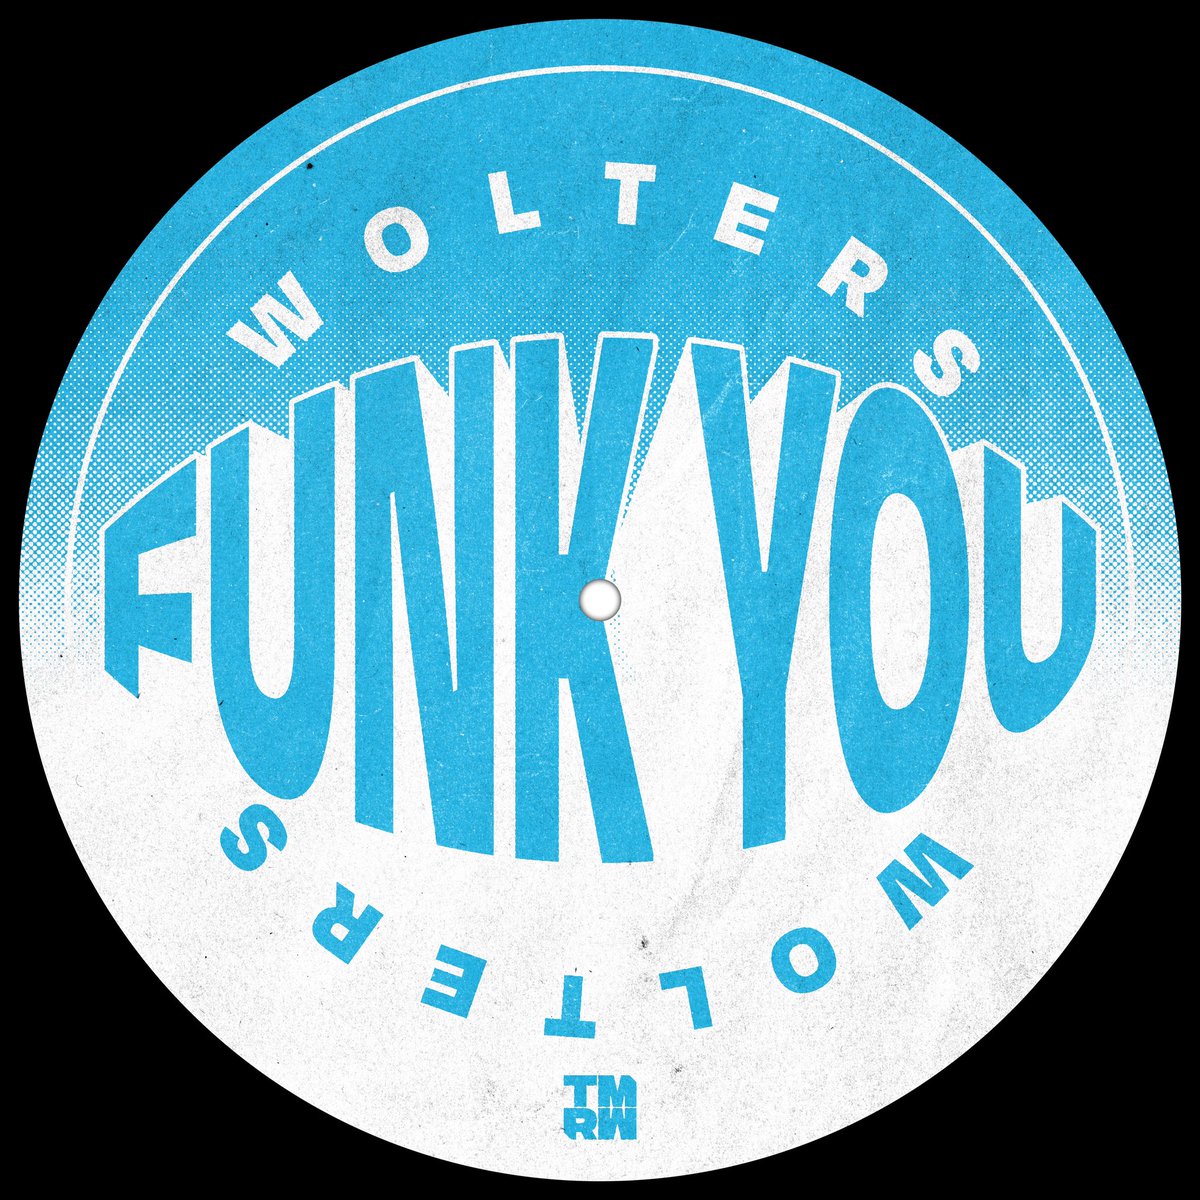 Funk You from Wolters is a slamming up tempo club monster with big brassy hooks & punchy synth stabs 🔥 Supported by: Sarah Story, Arielle Free, Adelphi Music, Factory, Narciss, Mr Belt & Wezol, Ruben Mandolini, Carl Bee, Viviana Casanova, Tommy McFadden, Beatamines and Generik